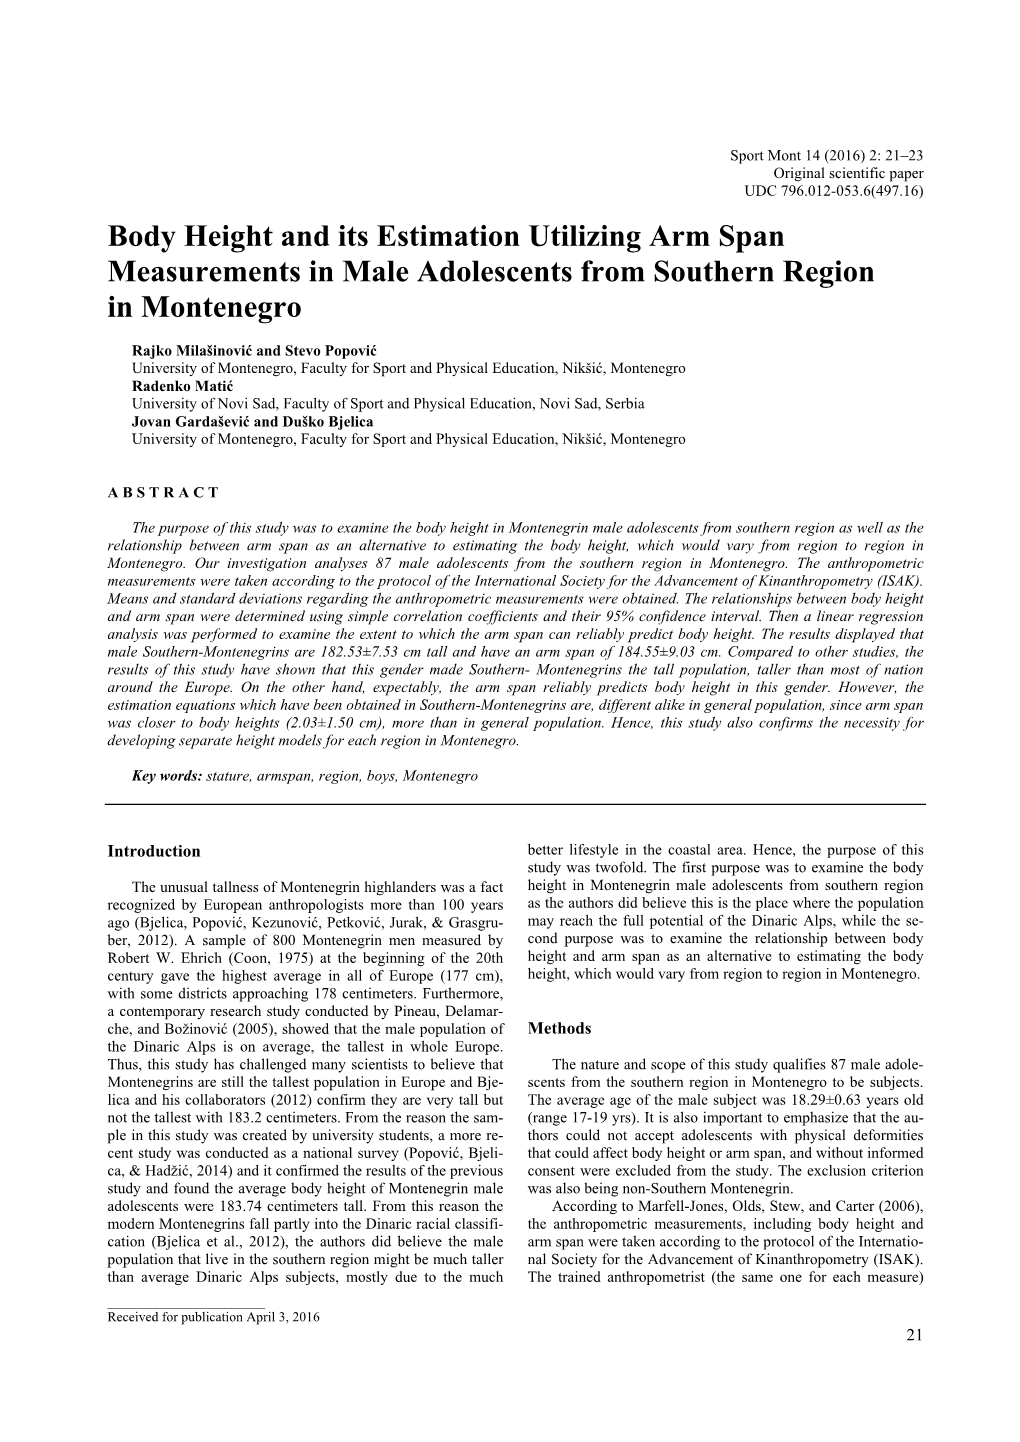 Body Height and Its Estimation Utilizing Arm Span Measurements in Male Adolescents from Southern Region in Montenegro